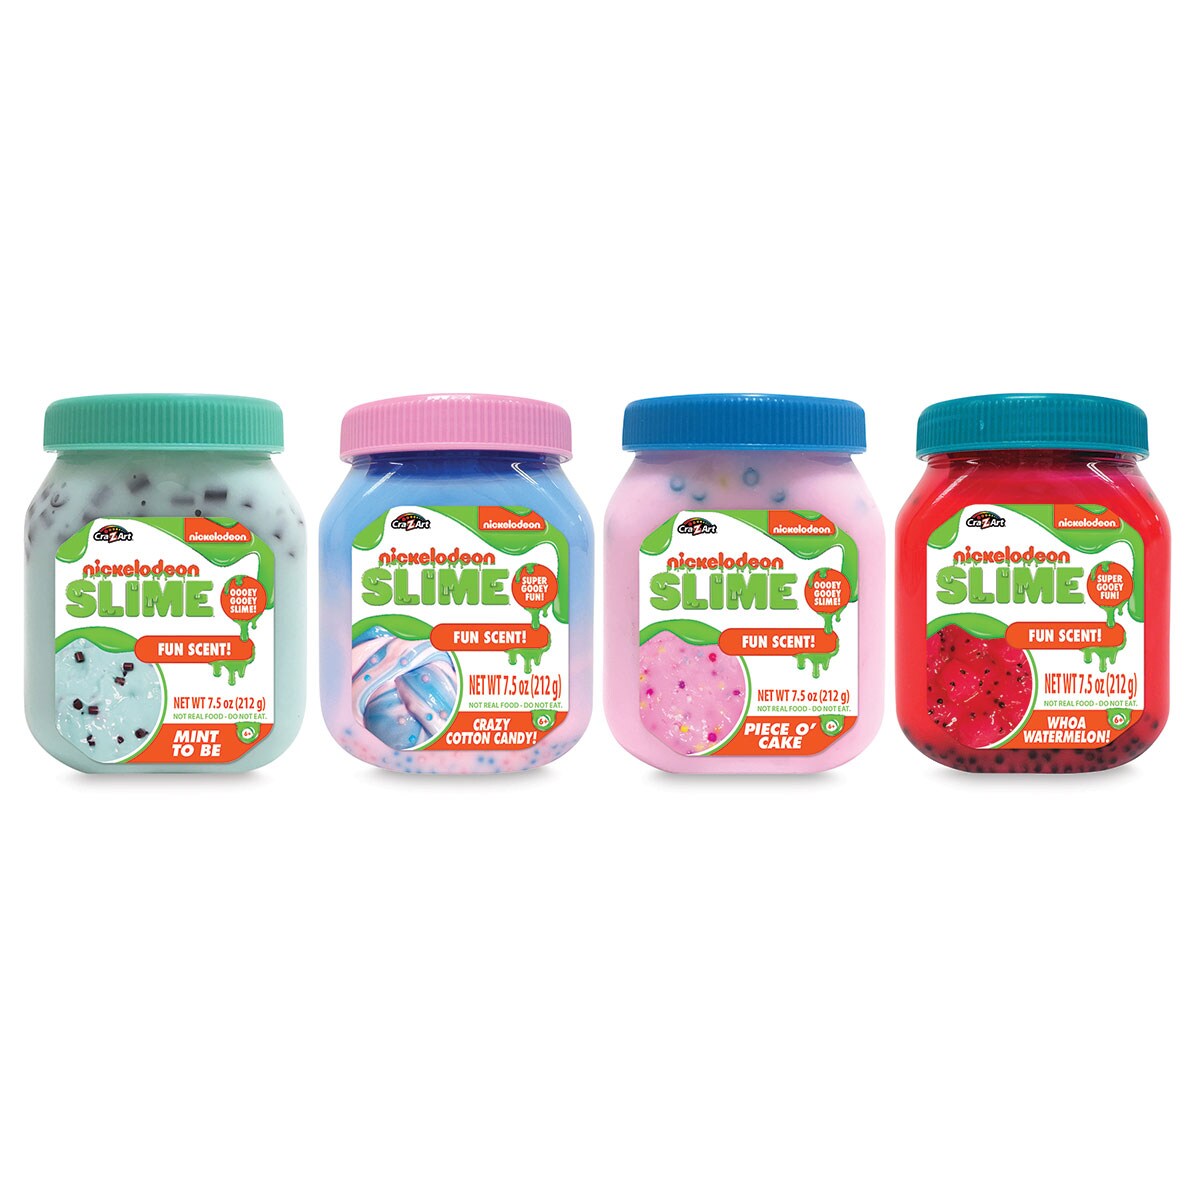 Nickelodeon Slime Food Slime 7.5 oz Whoa Watermelon New Factory Sealed. for  Sale in Orlando, FL - OfferUp